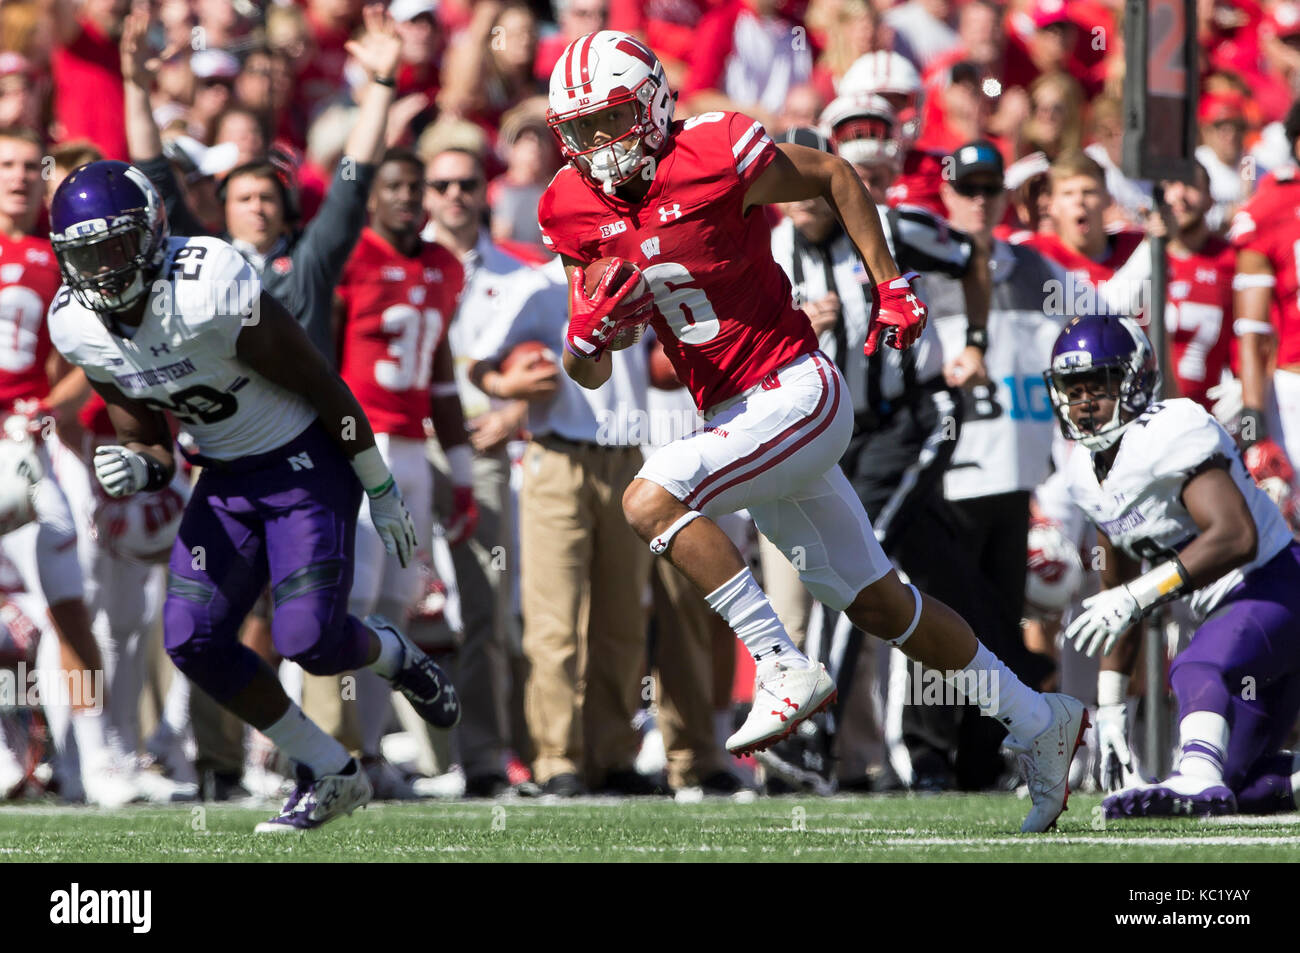 Madison, WI, USA. 30th Sep, 2017. Wisconsin Badgers wide receiver Danny Davis III #6 takes off after the catch during the NCAA Football game between the Northwestern Wildcats and the Wisconsin Badgers at Camp Randall Stadium in Madison, WI. Wisconsin defeated Northwestern 33-24. John Fisher/CSM/Alamy Live News Stock Photo